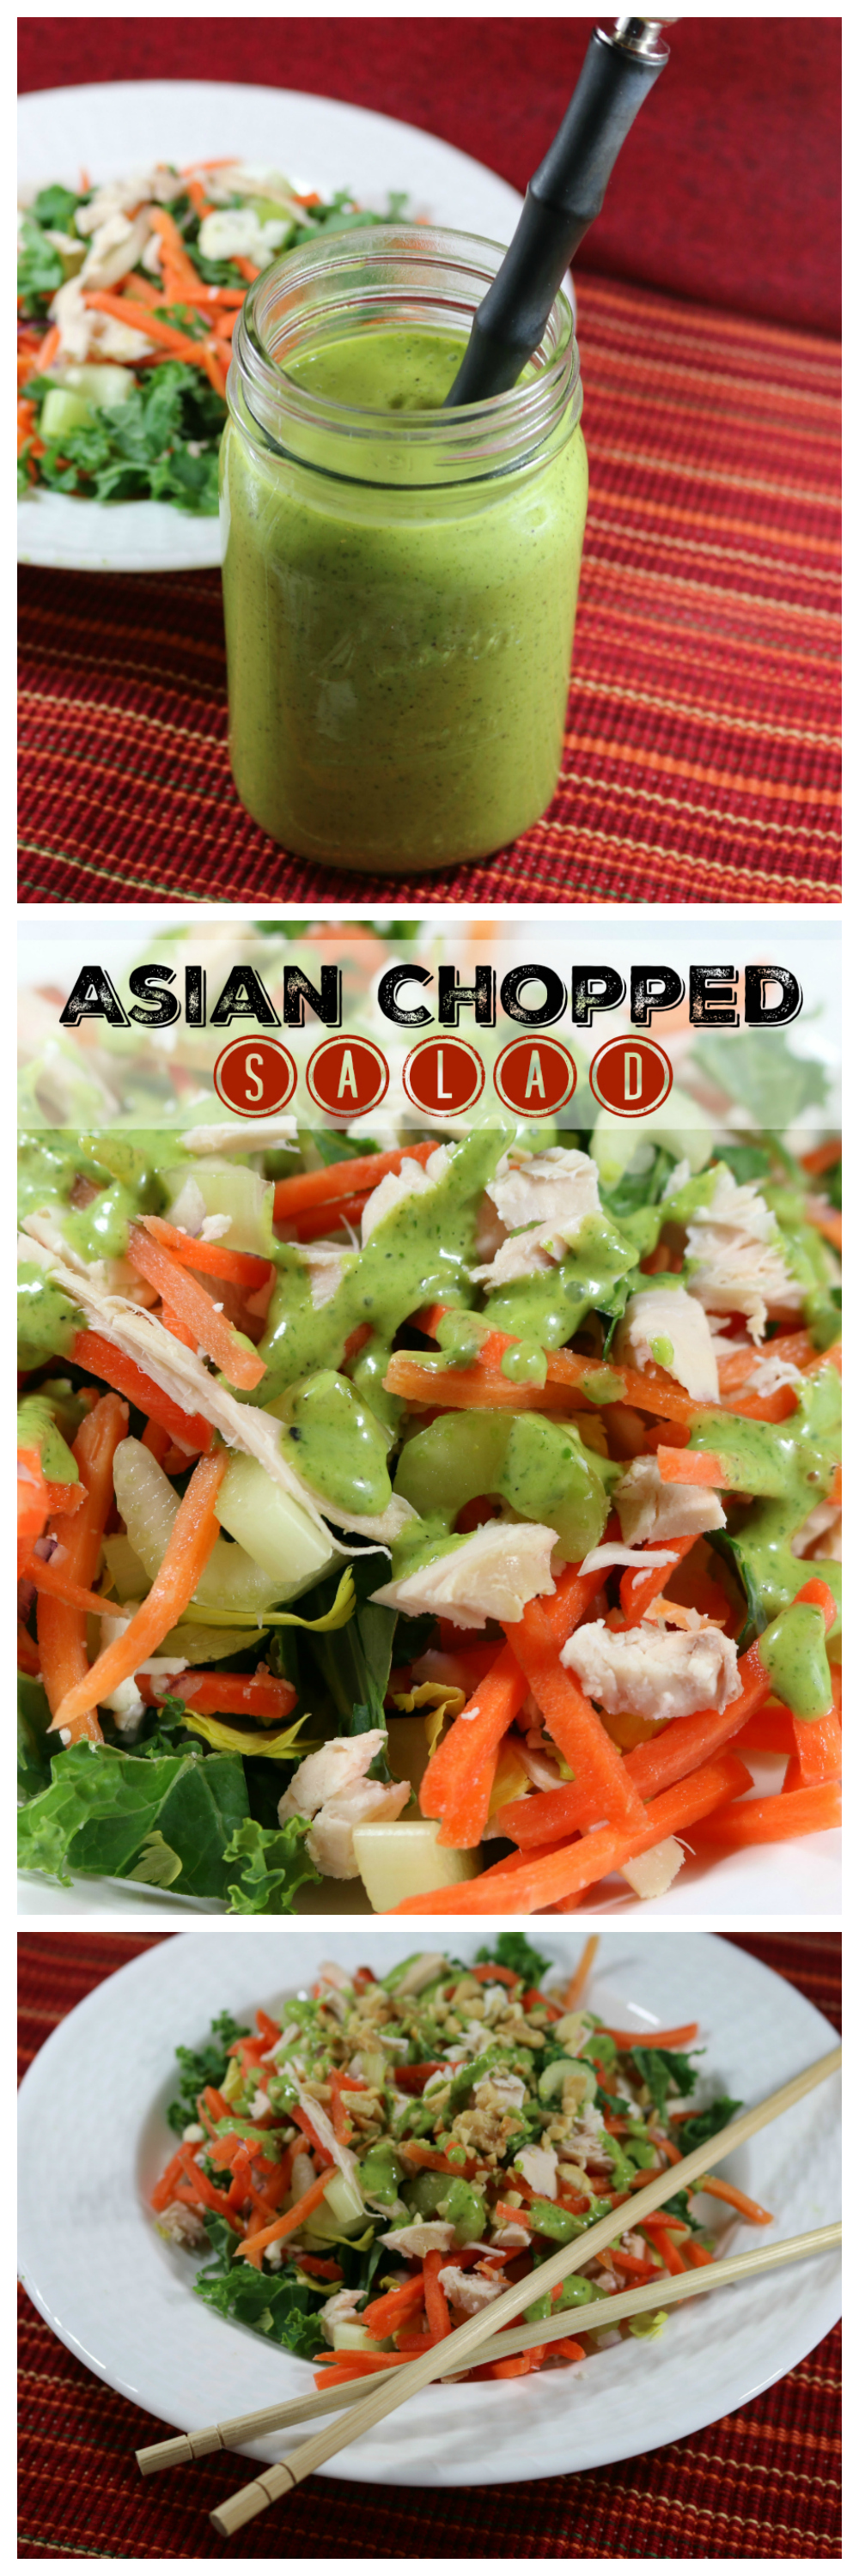 Asian Chopped Salad with Cilantro Lime Dressing CeceliasGoodStuff.com Good Food for Good People